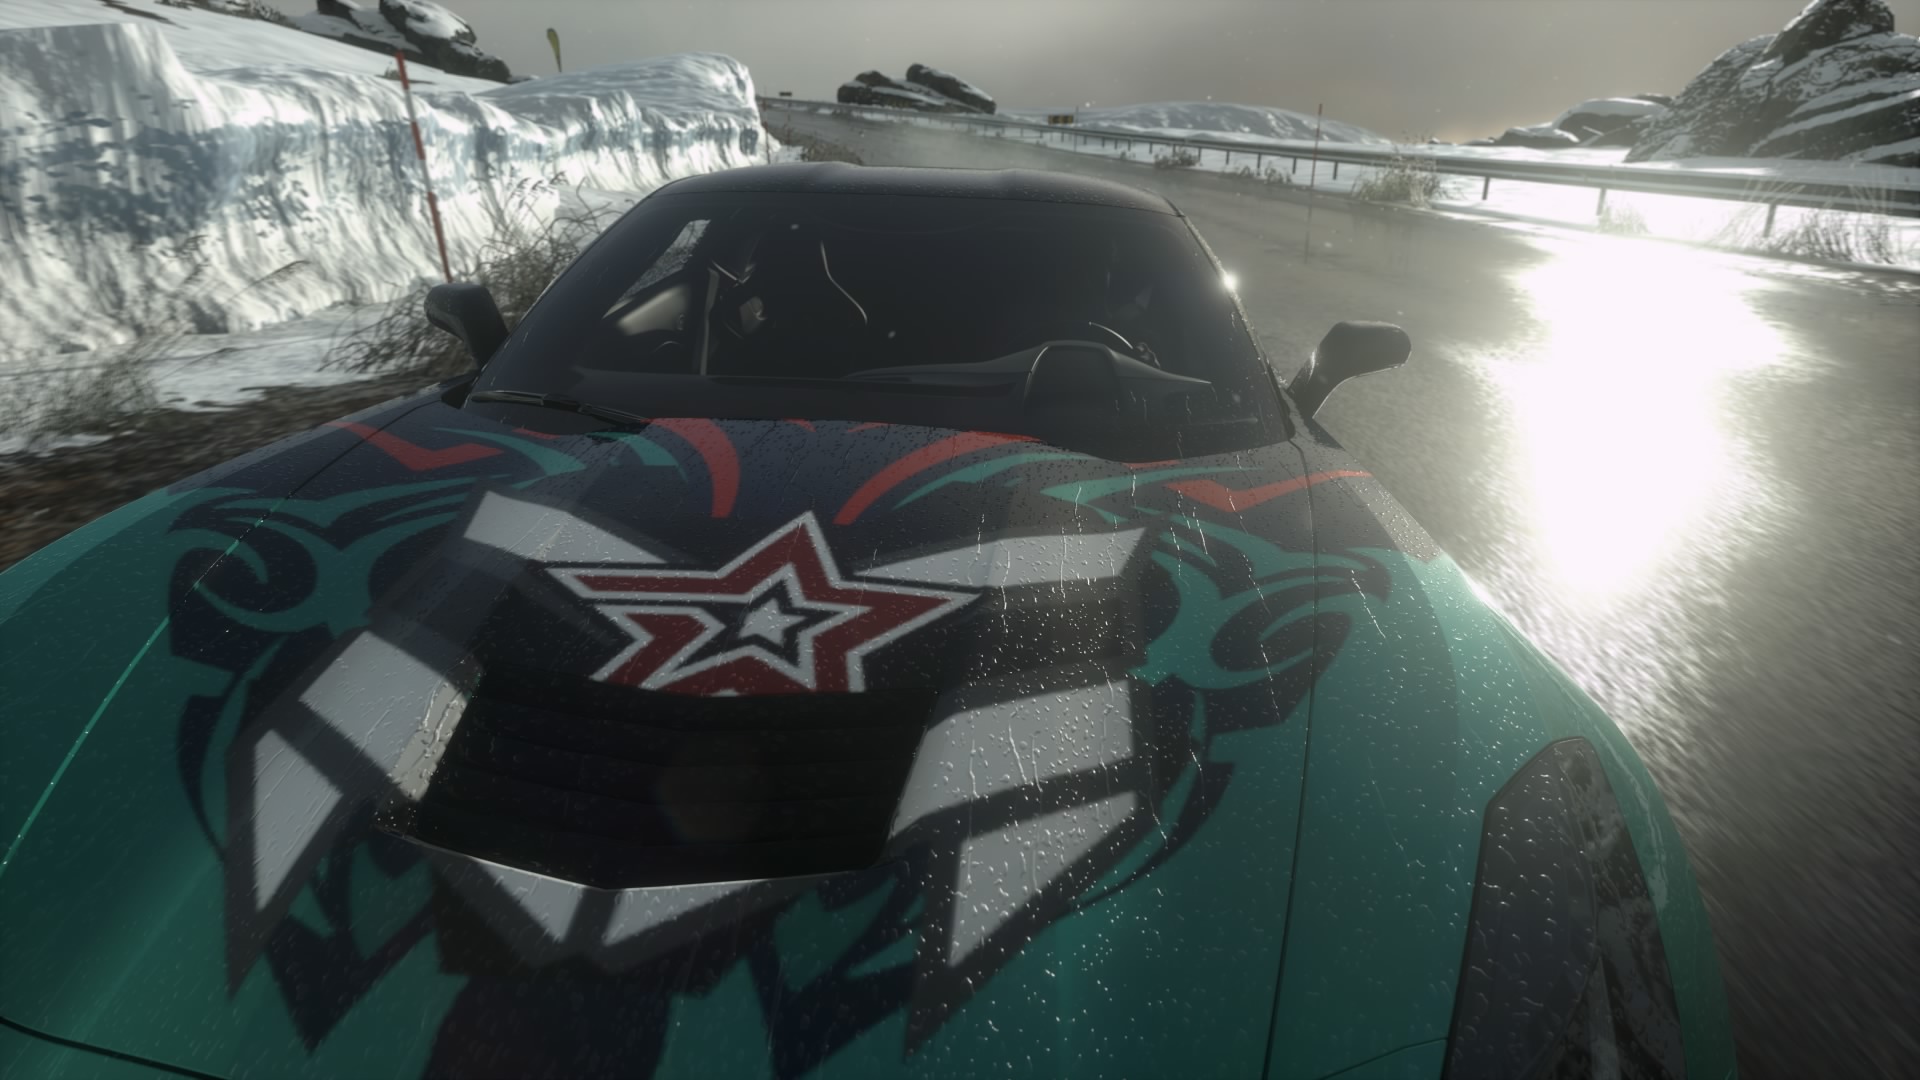 Free download wallpaper Video Game, Driveclub on your PC desktop